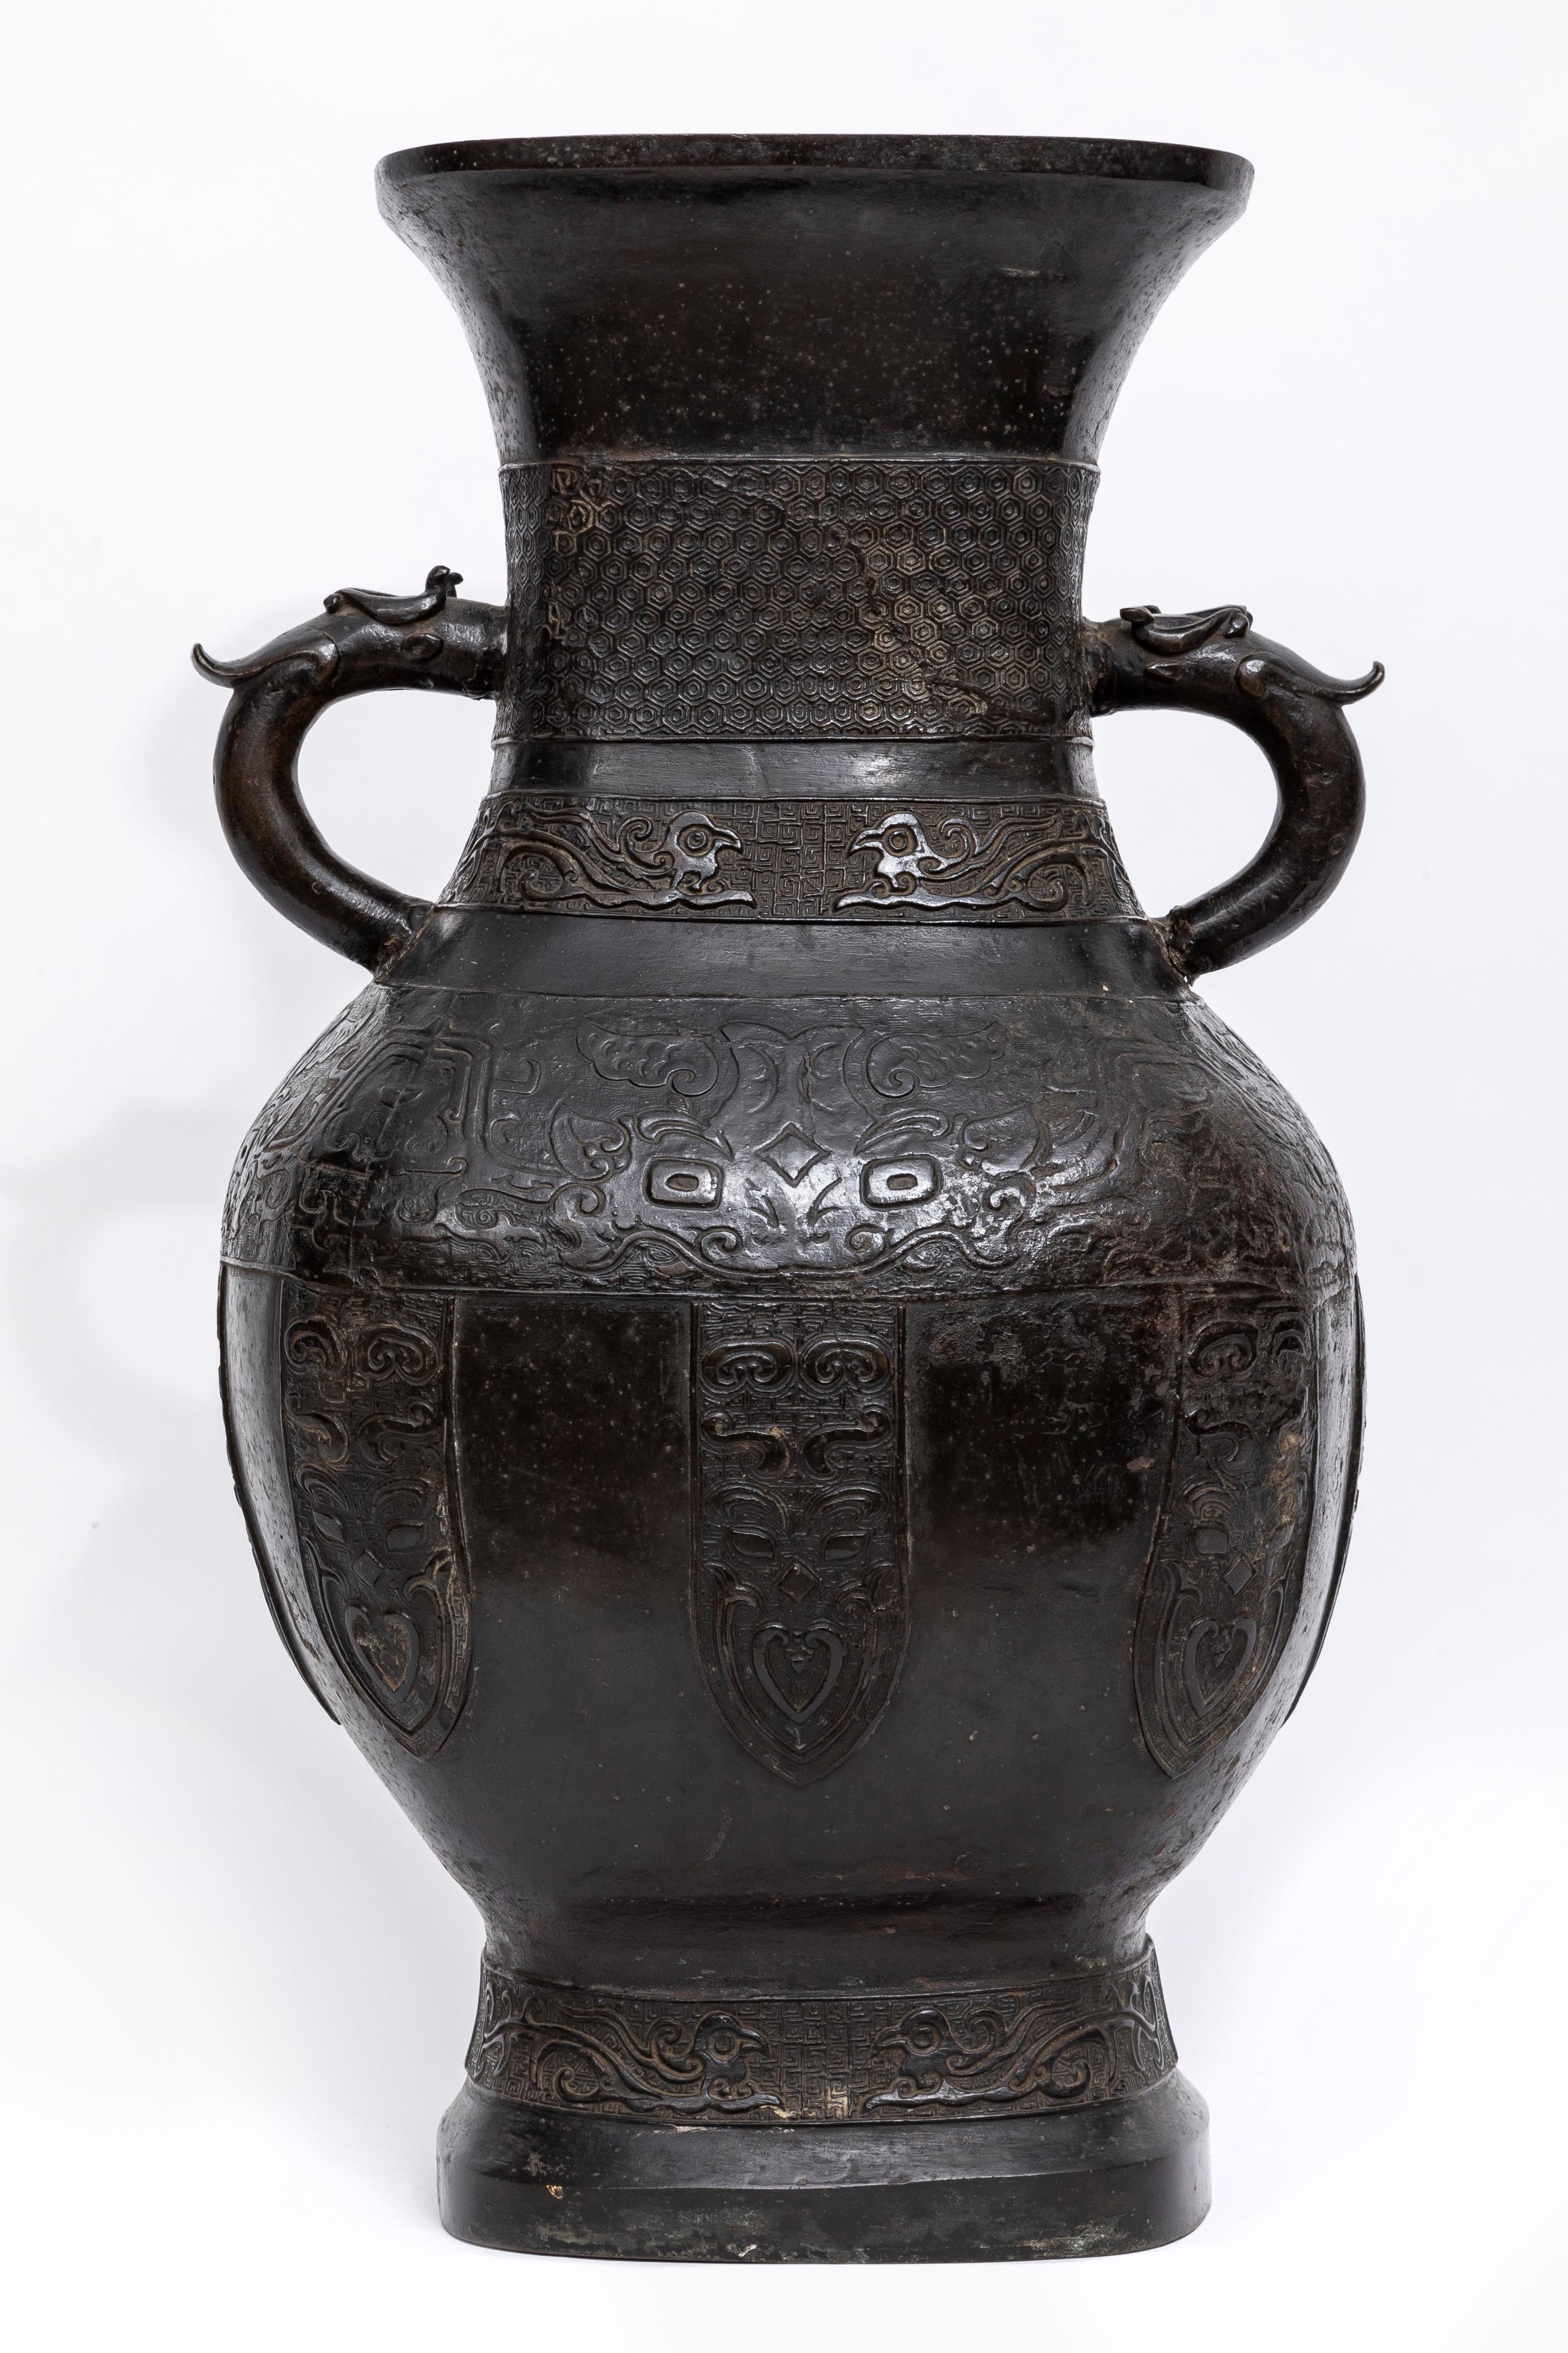 Hailing from the Ming period in 16/17th century, this monumental bronze vase is a fine example of the auspicious decor and markings unique to Chinese furnishings. The vase is cast with taotie masks, the basin is impressed with religious symbolism,